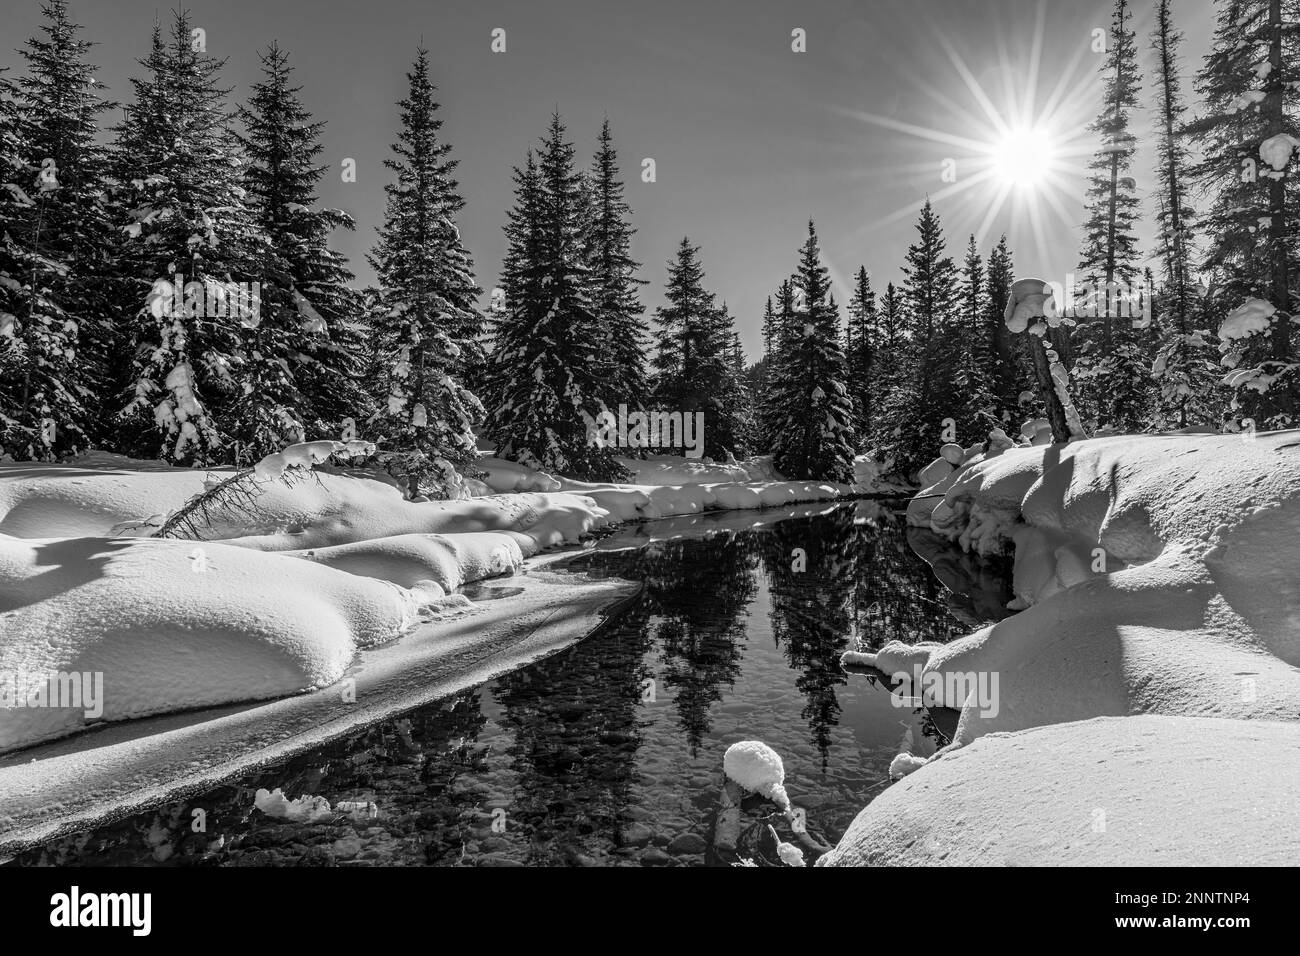 Pond in snow-covered forest in black and white, Bow River Channel, Lake Louise, Alberta, Canada Stock Photo